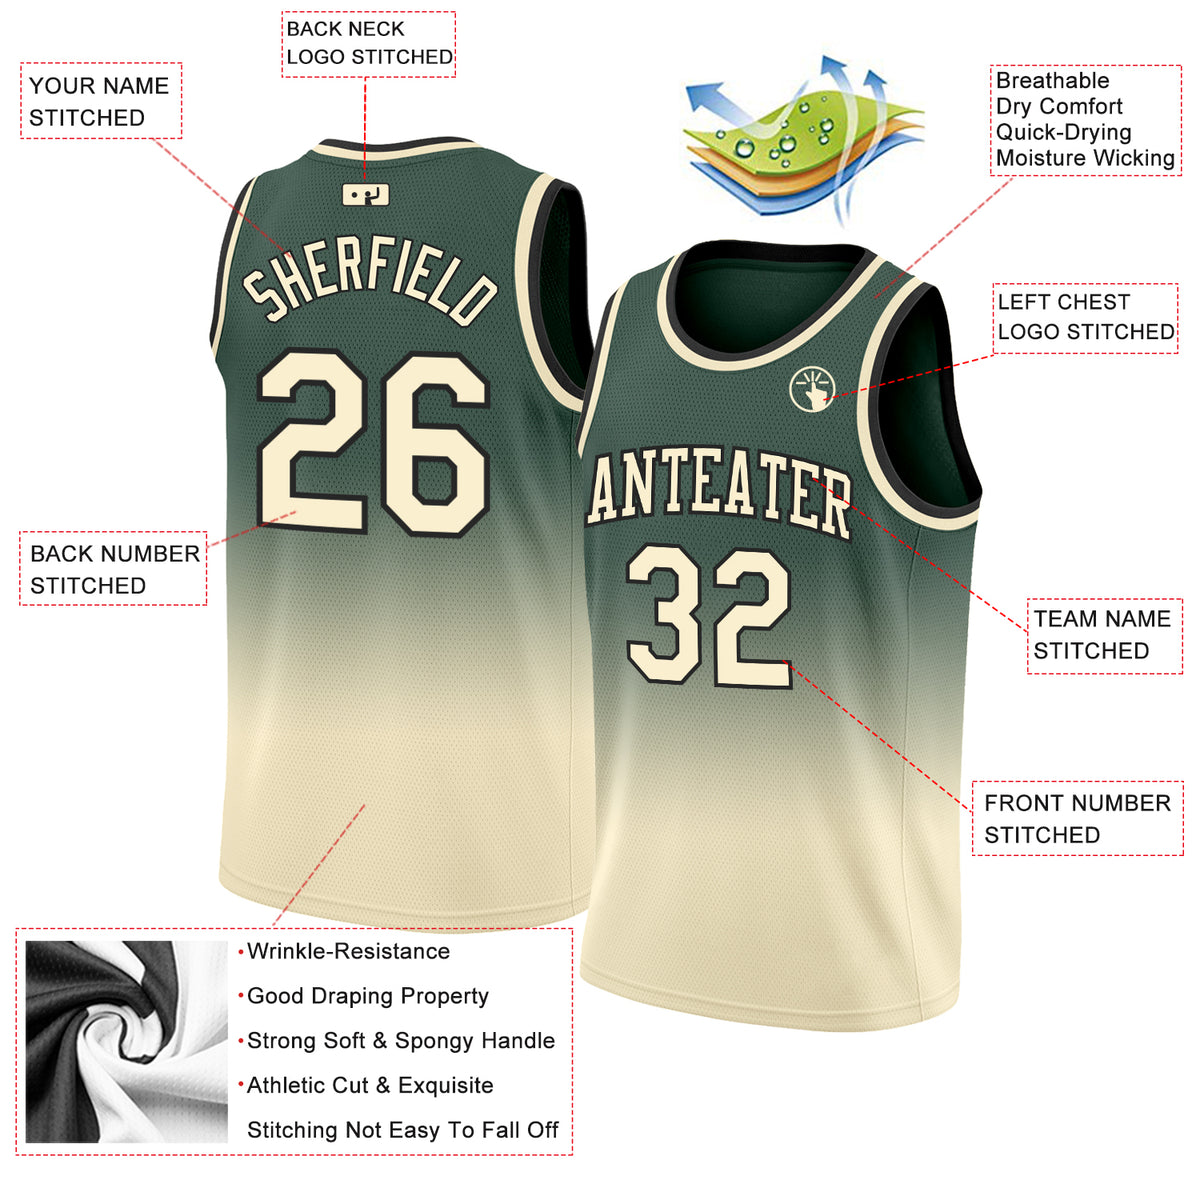 NEW BASKETBALL MILWAUKEE 08 BUCKS JERSEY FREE CUSTOMIZE OF NAME AND NUMBER  ONLY full sublimation high quality fabrics/ trending jersey